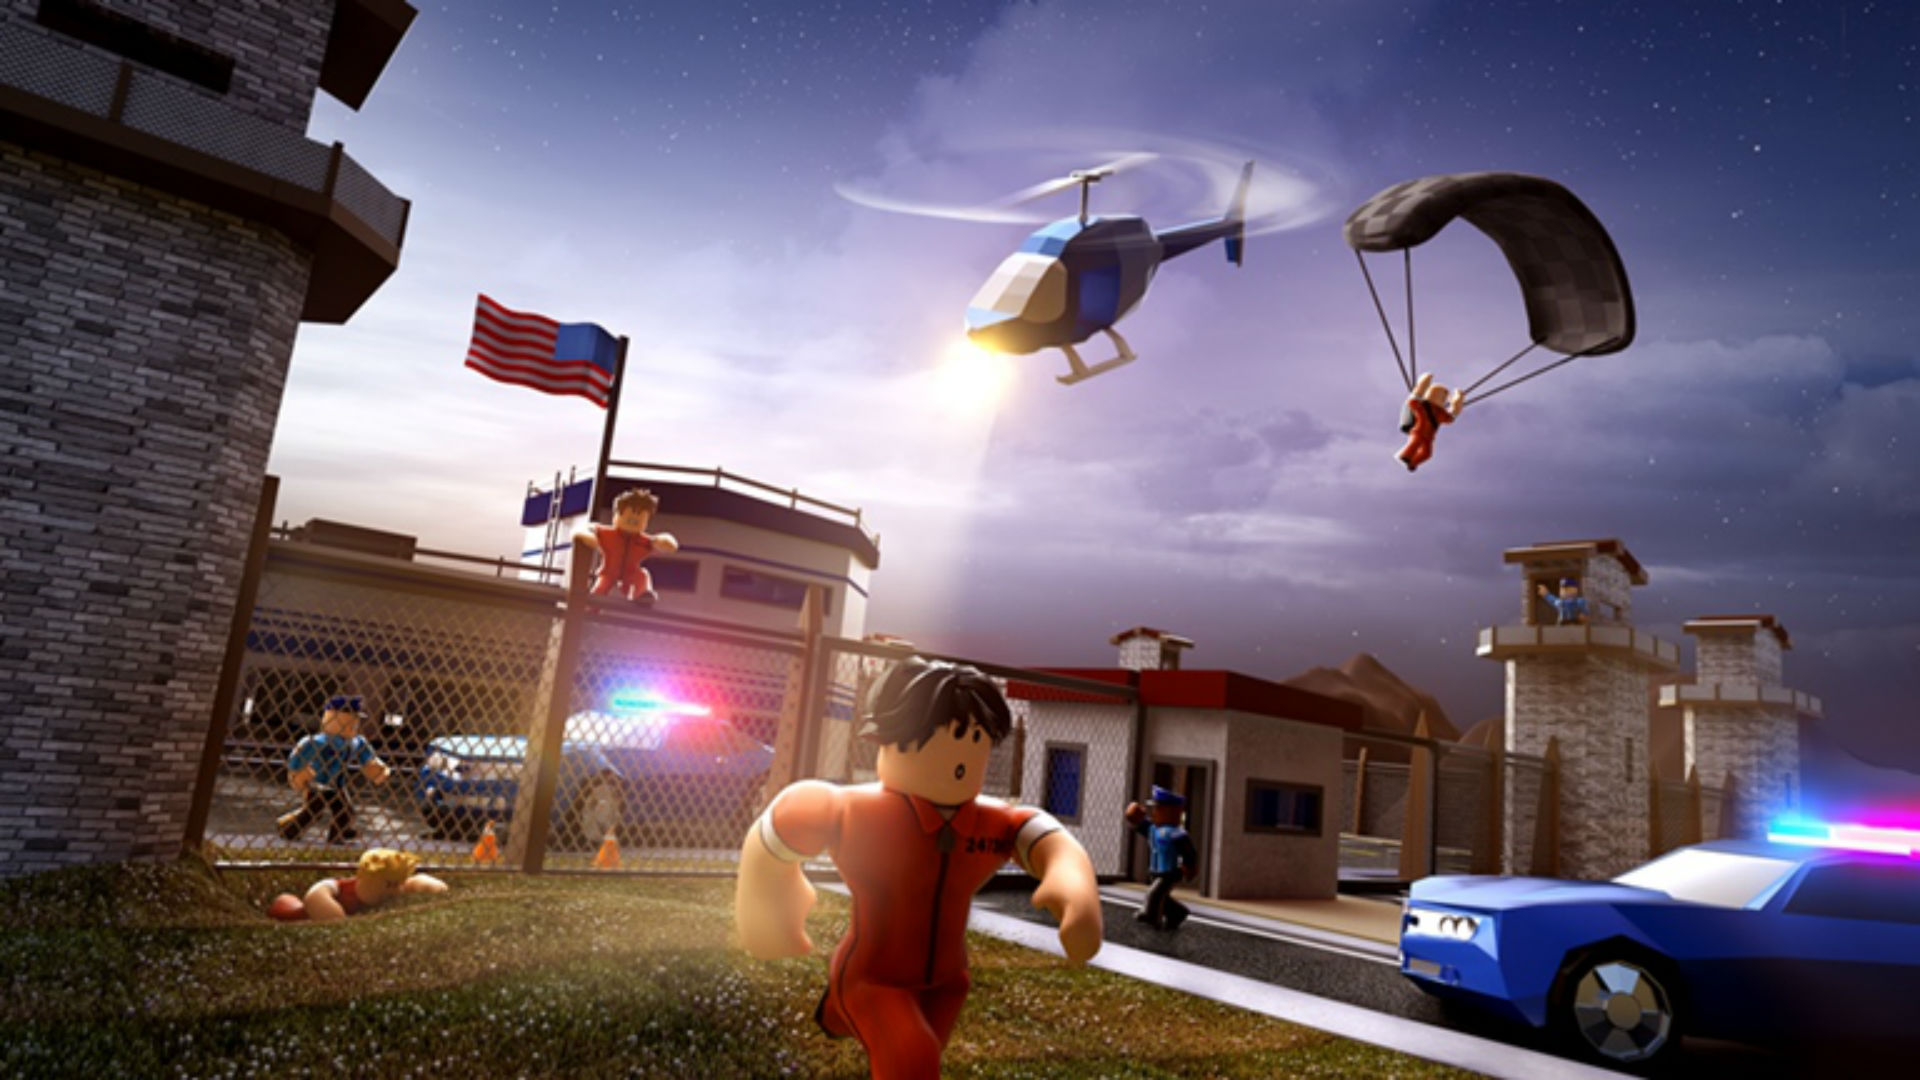 Roblox surpasses Minecraft with 100 million monthly players - The